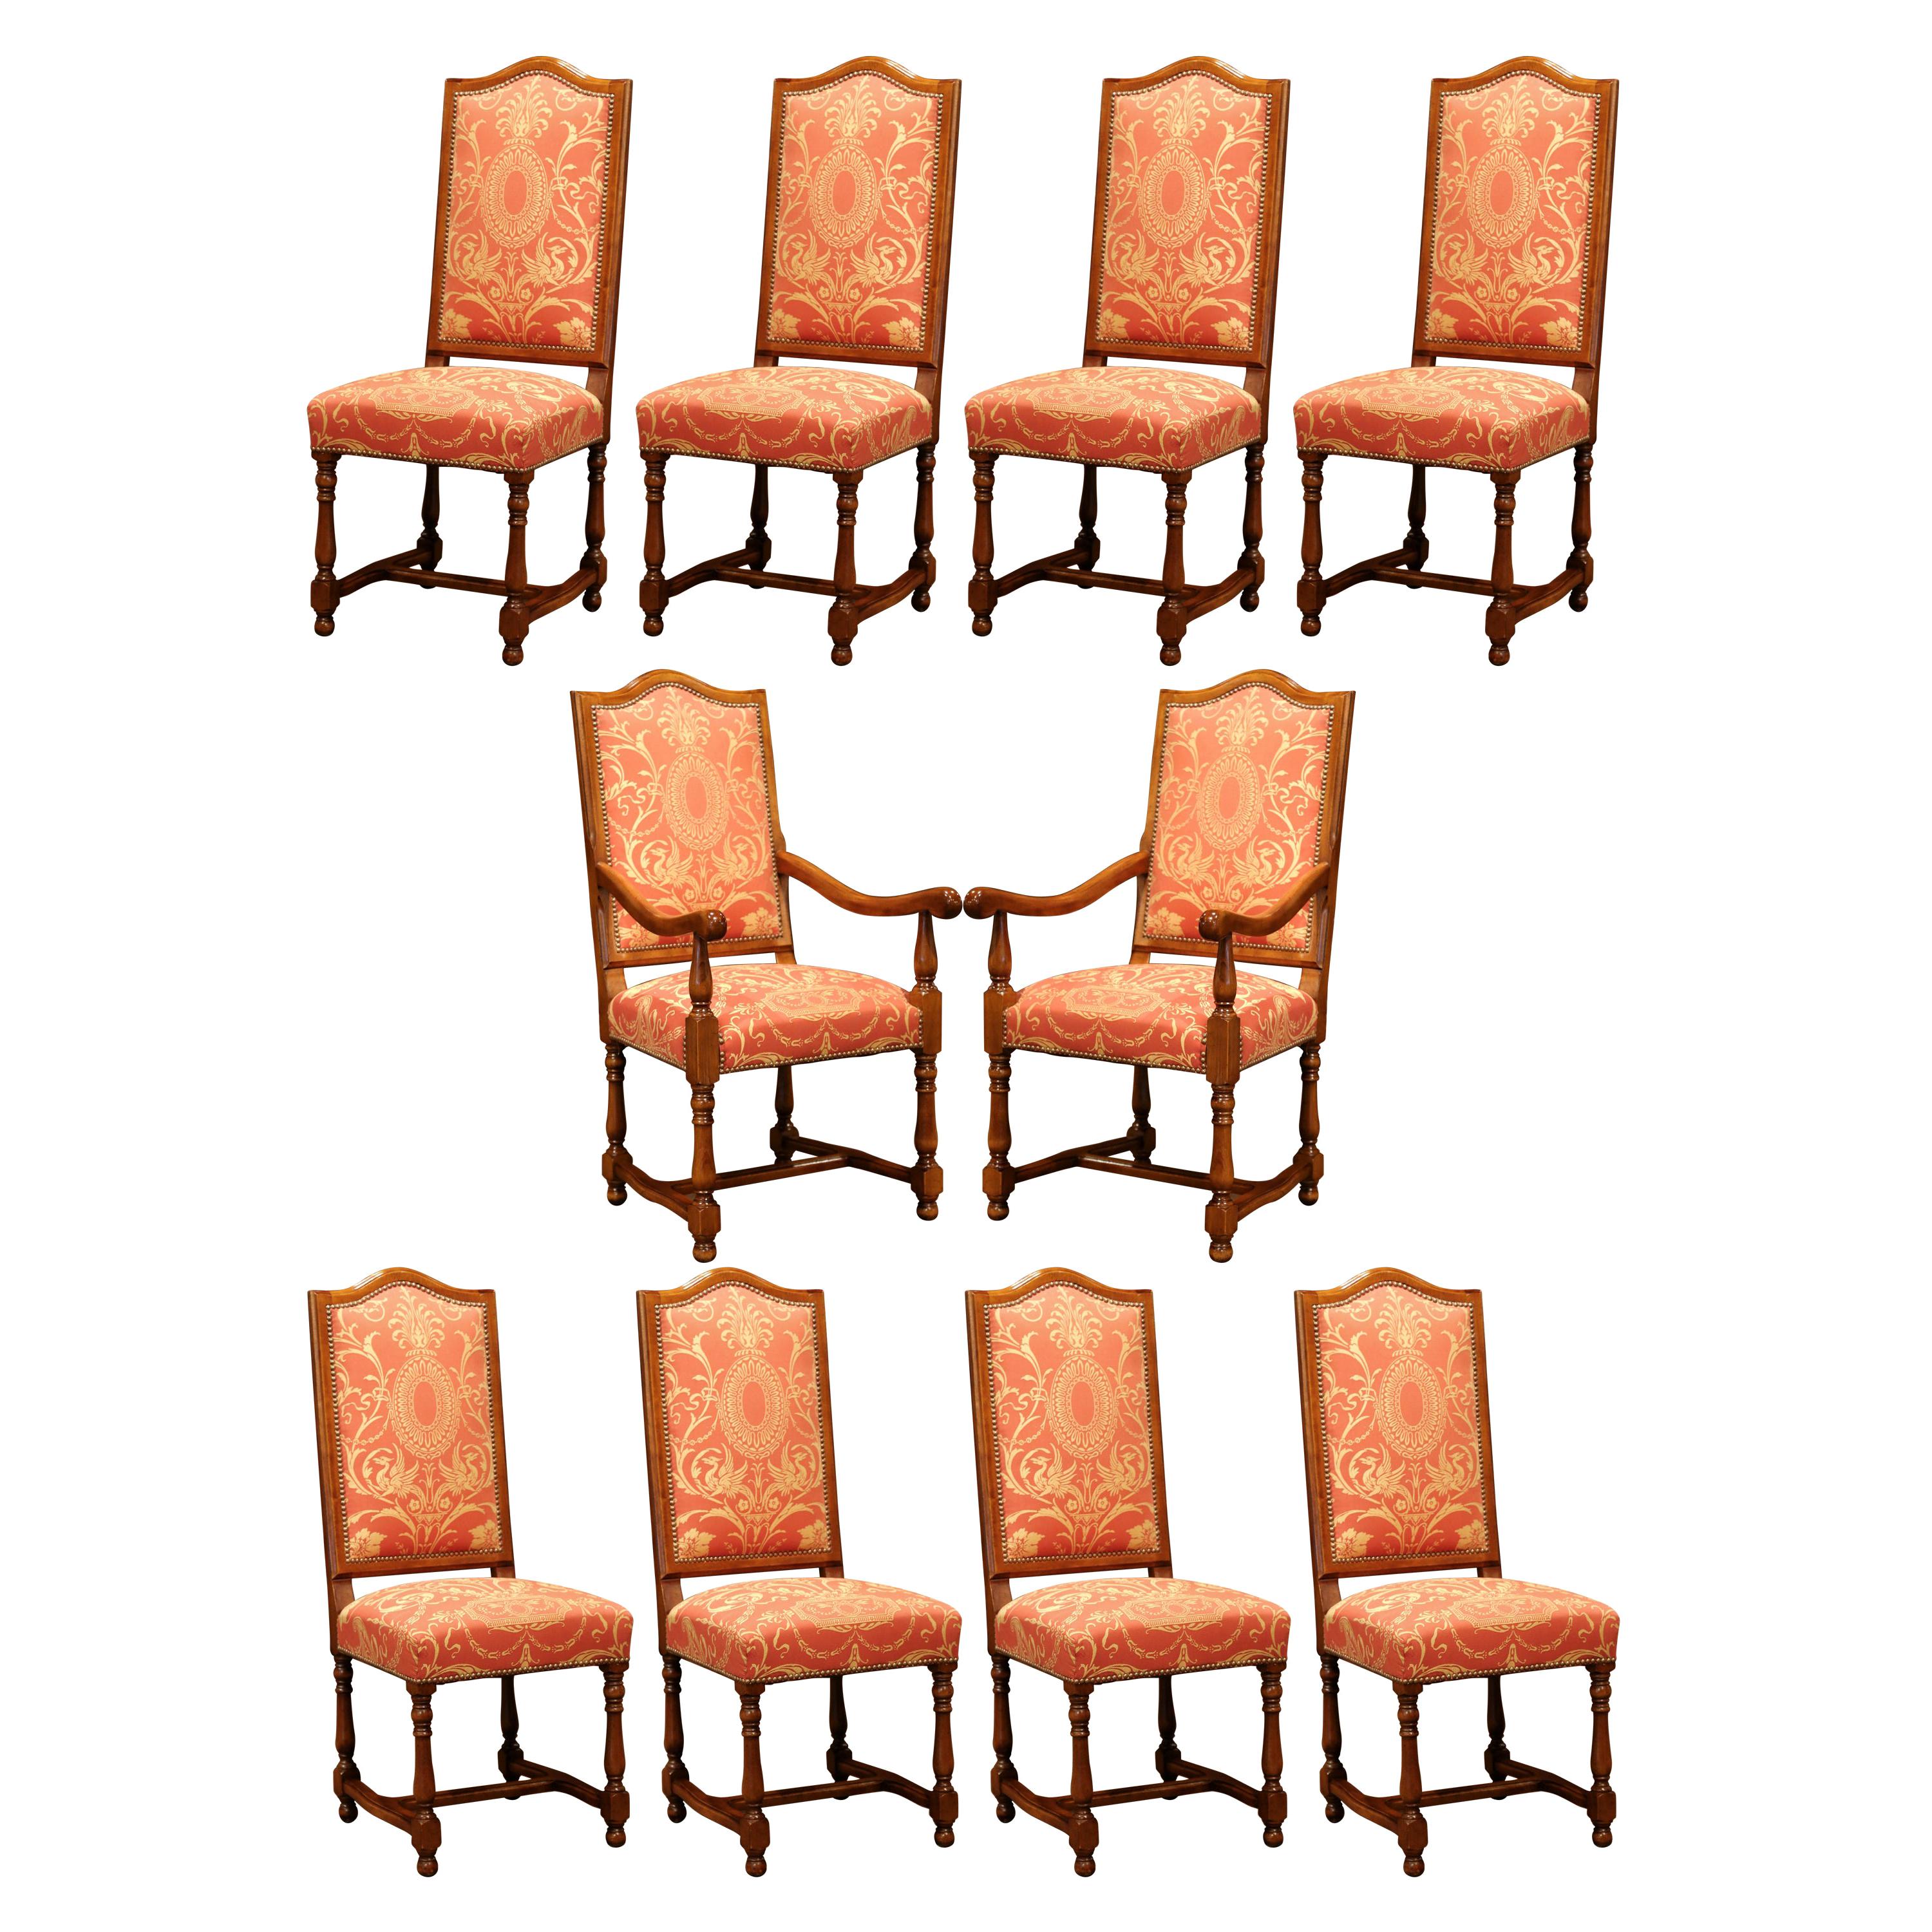 20th Century French Carved Cherry Dining Room Suite, 8 Chairs and 2 Armchairs